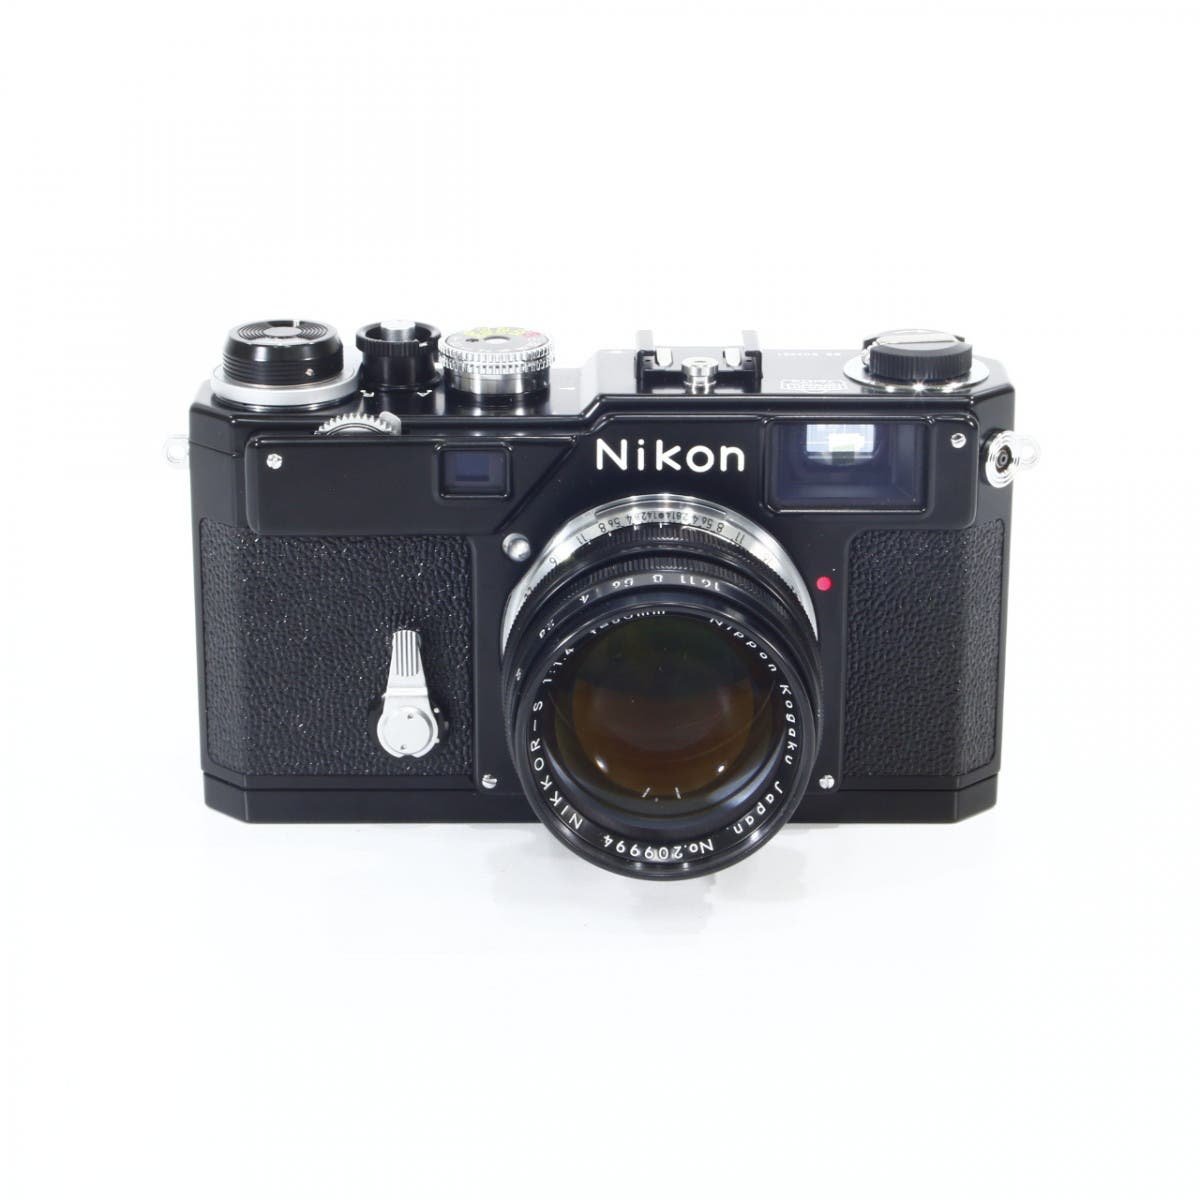 This Nikon S3 Rangefinder Is a Special Limited Edition, and It’s Beautiful